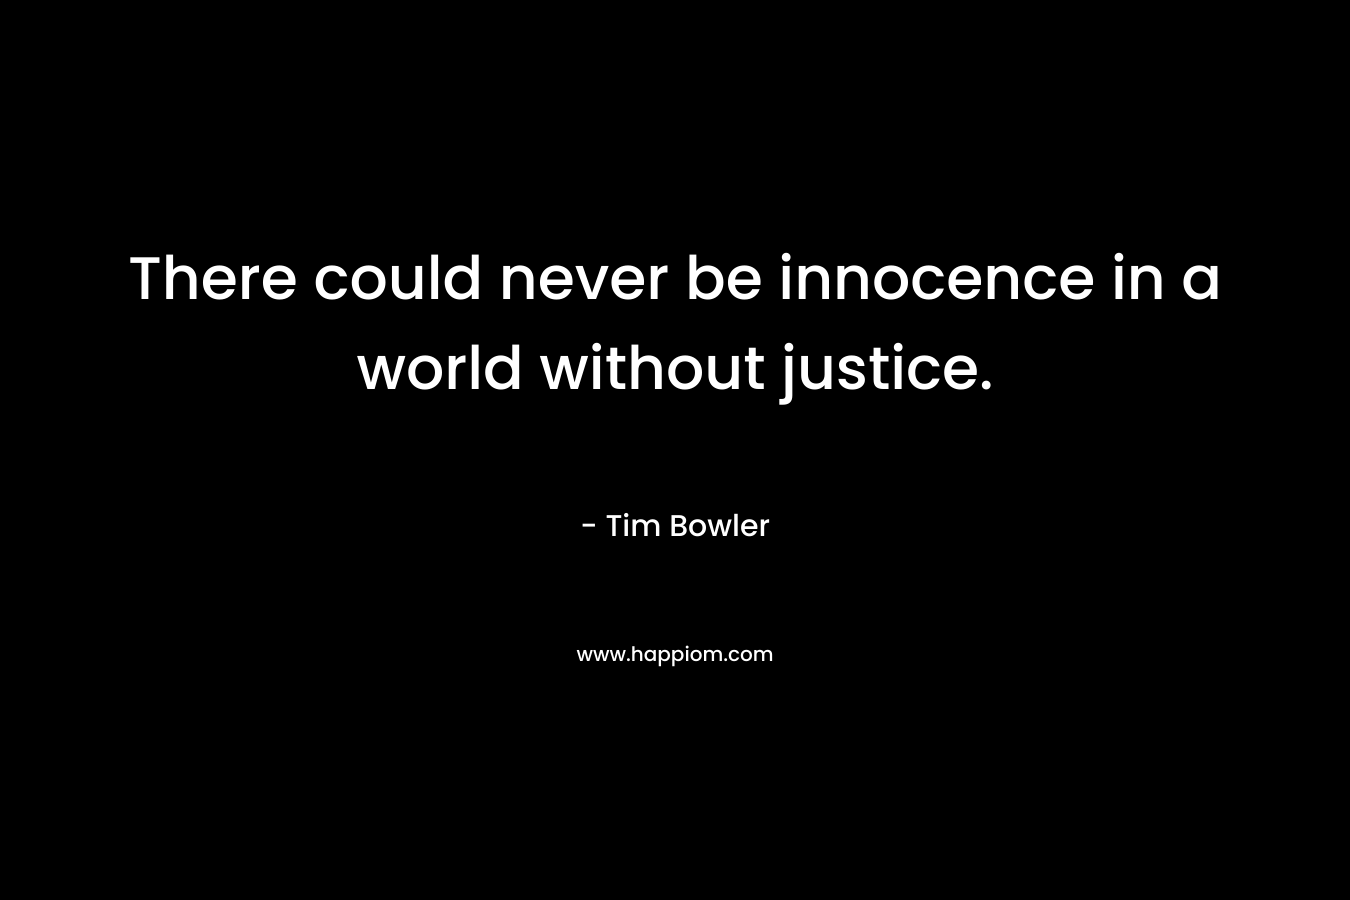 There could never be innocence in a world without justice. – Tim Bowler